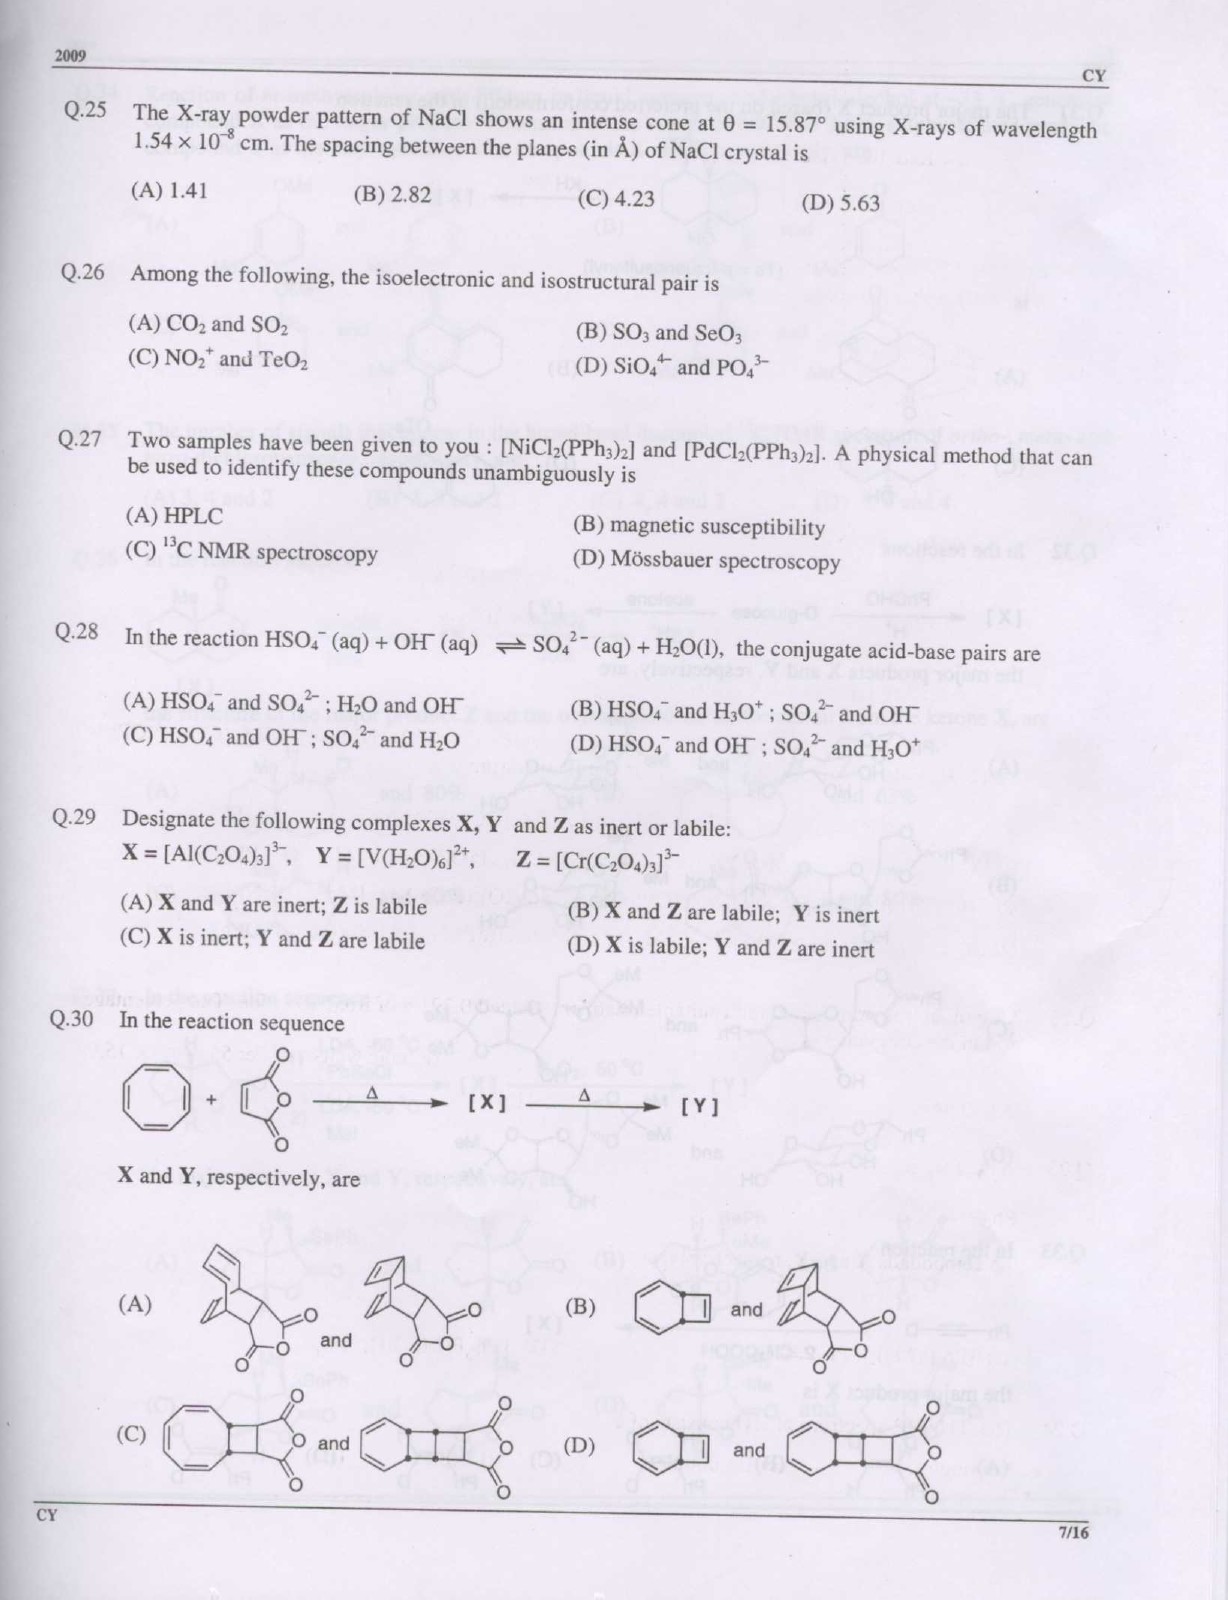 GATE Exam Question Paper 2009 Chemistry 7